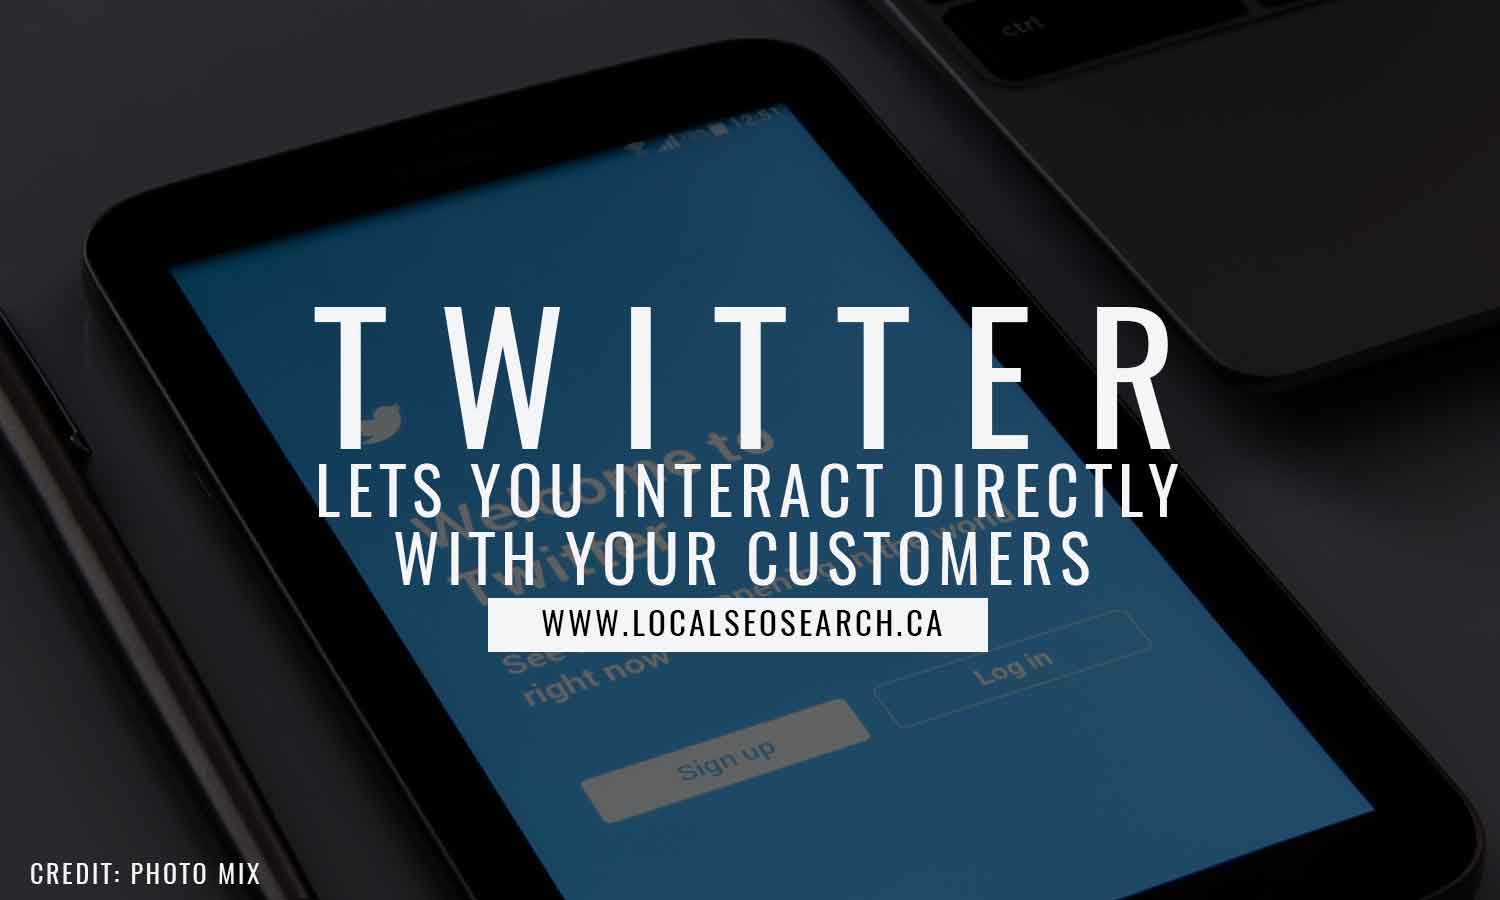 Twitter lets you interact directly with your customers